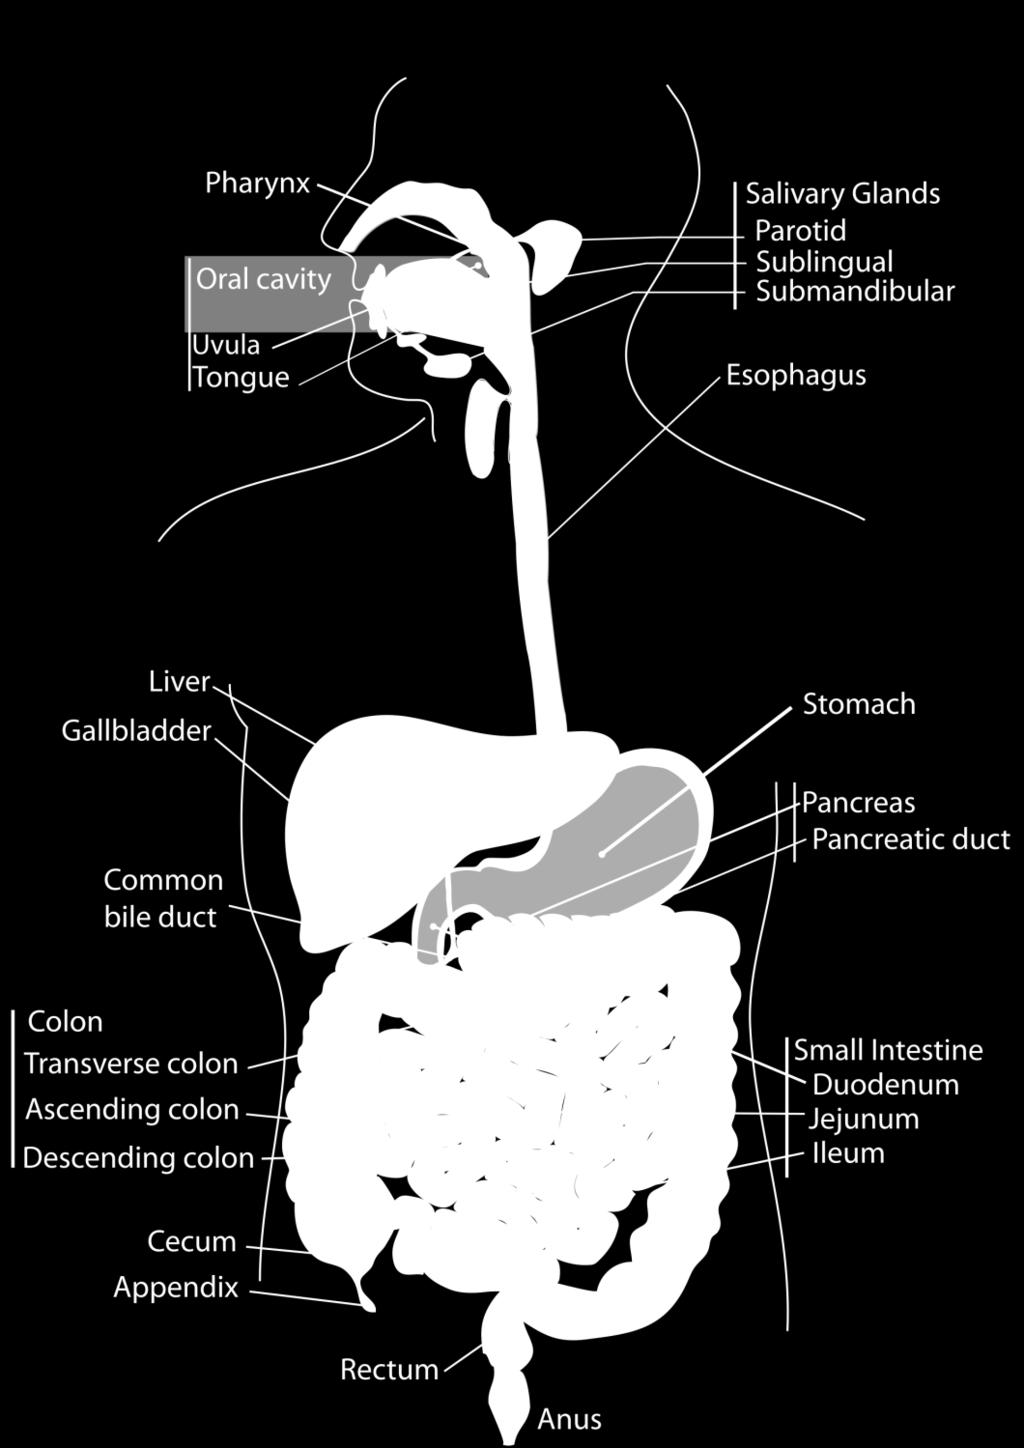 1. Digestion of foods and absorption of nutrients takes place in stomach and small bowel in only 2-3